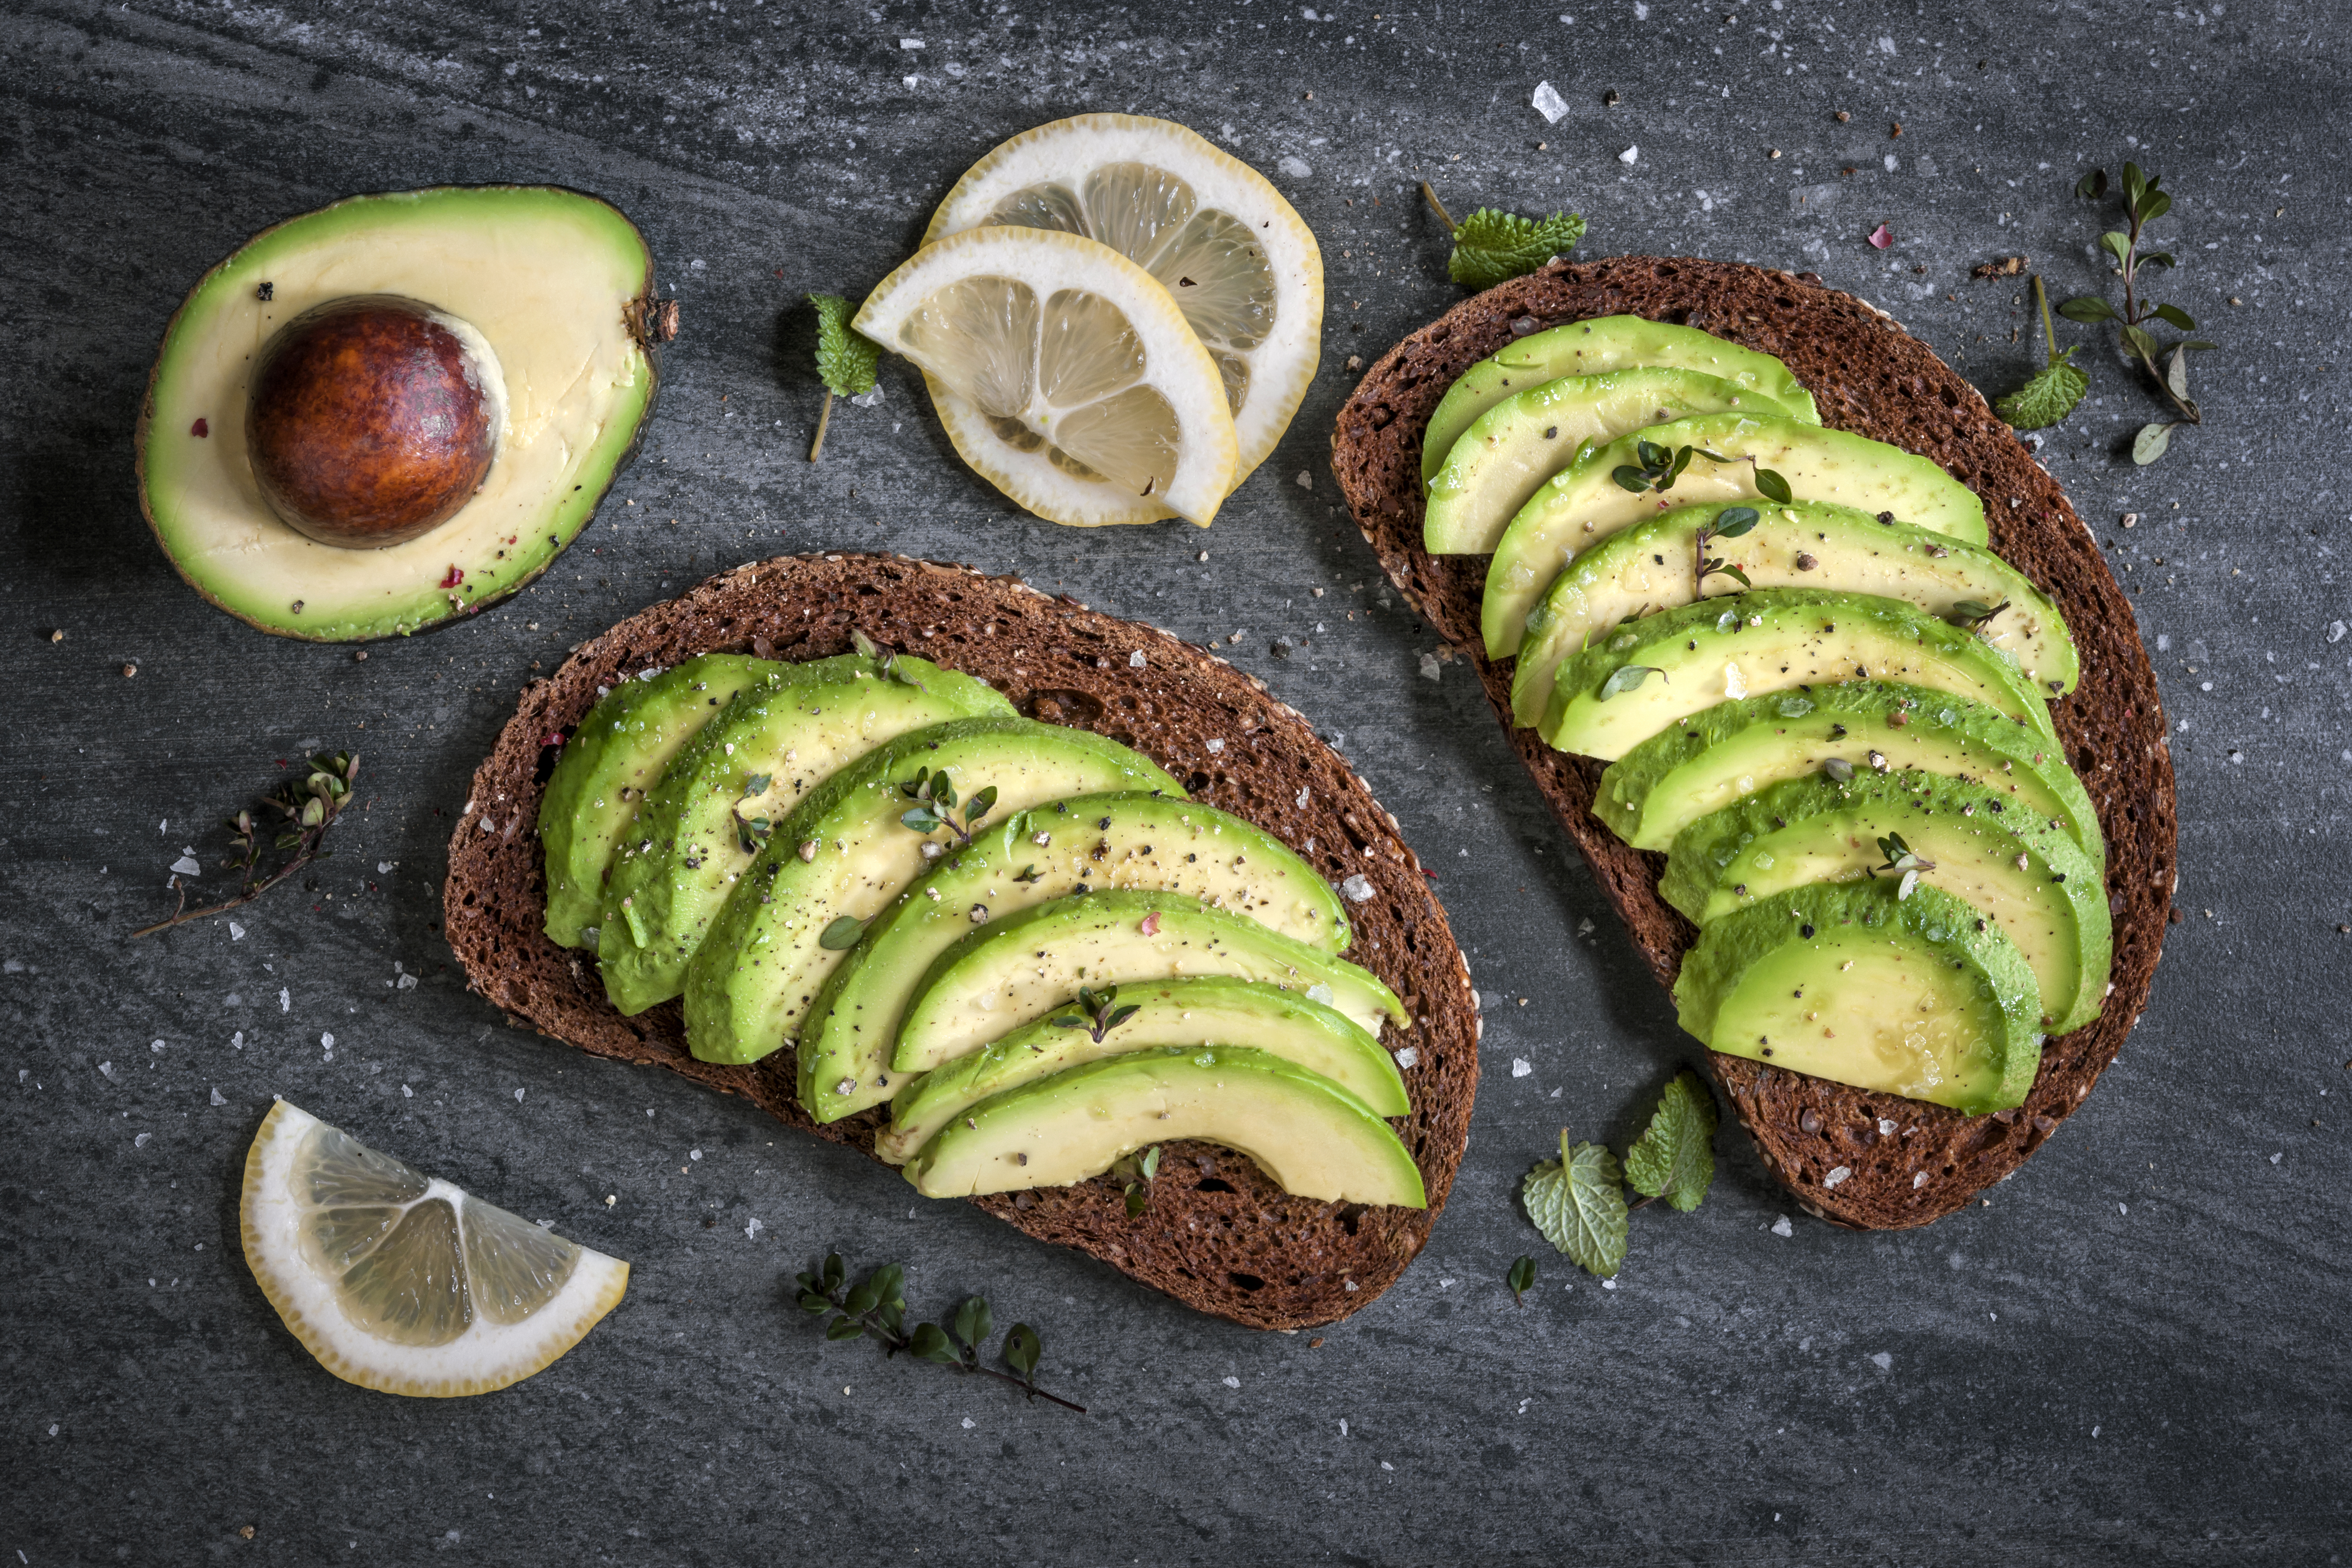 Avocados on toast | Source: Shutterstock